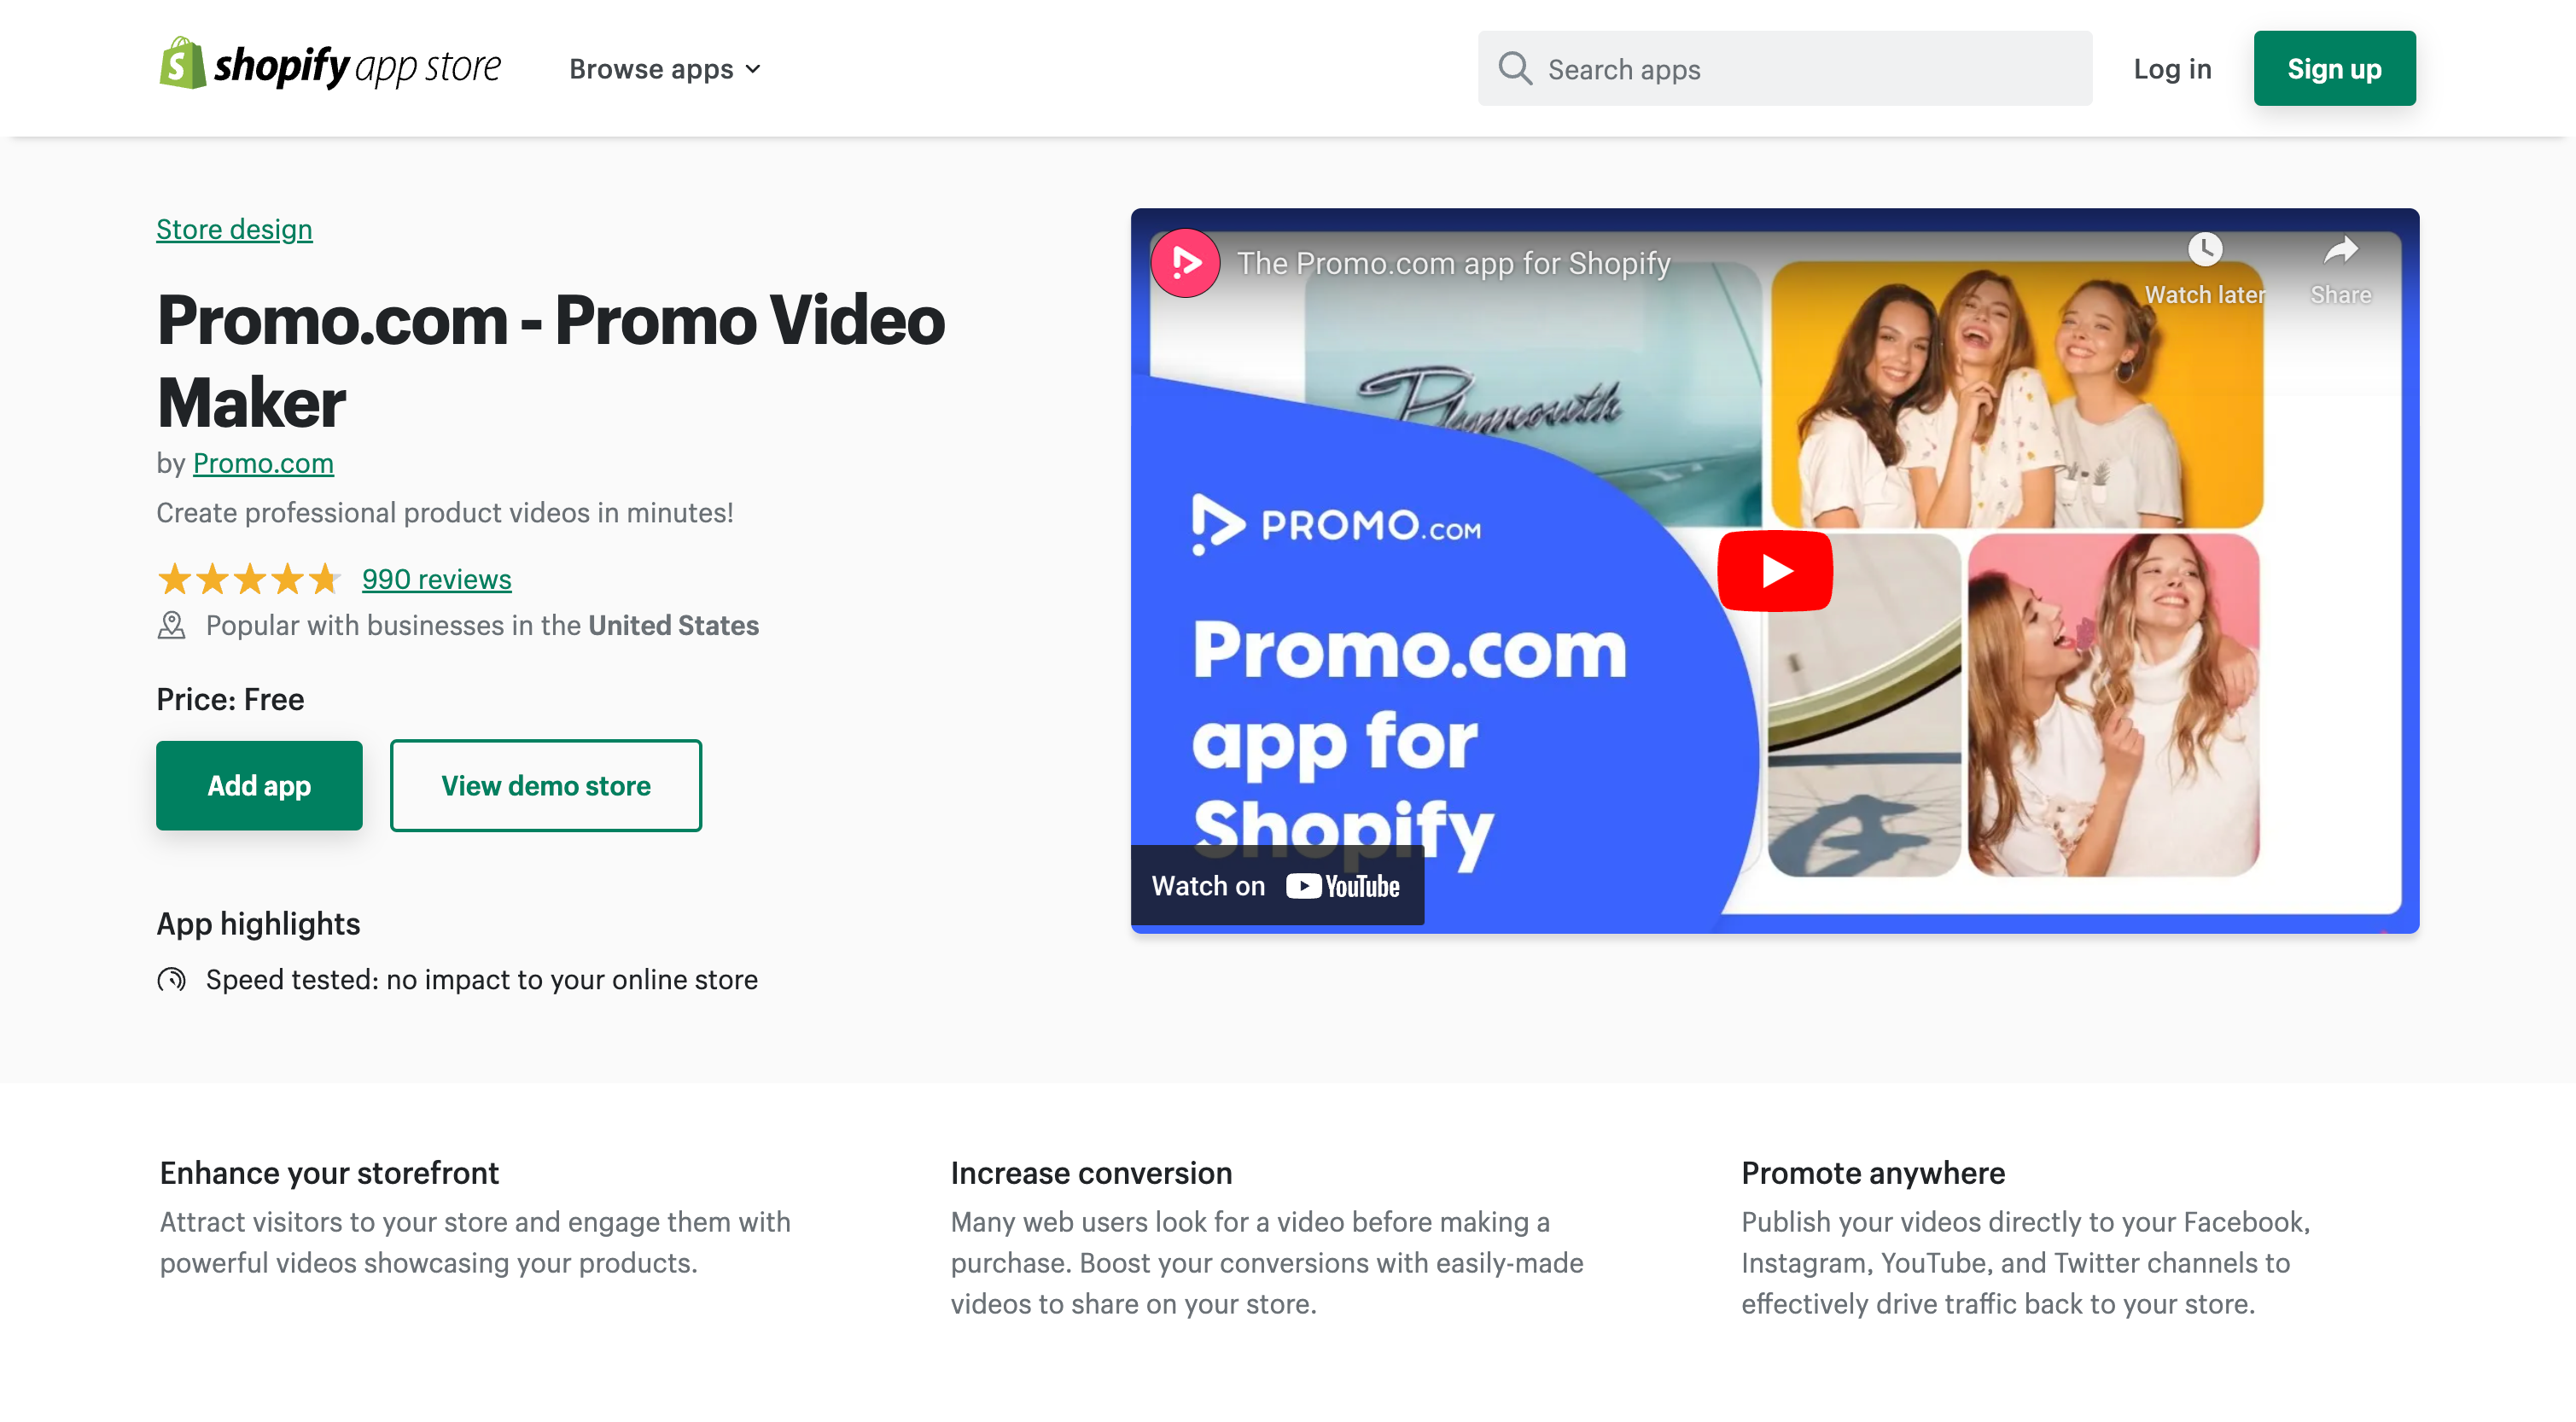 Promo Video Maker - Create professional product videos in minutes! | Shopify App Store